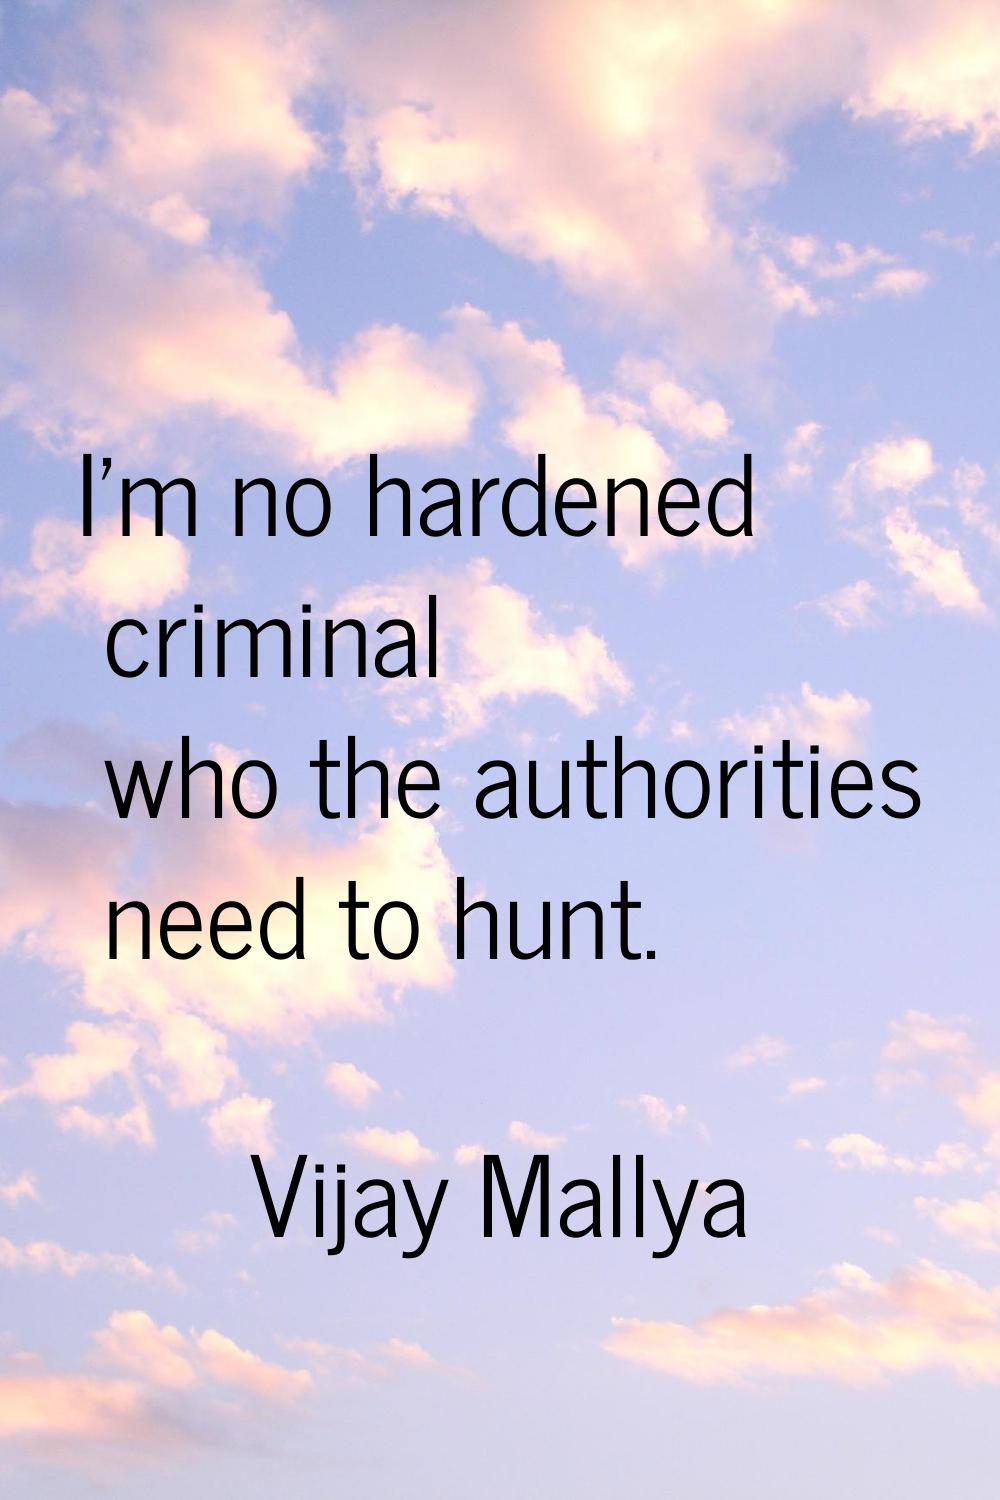 I'm no hardened criminal who the authorities need to hunt.